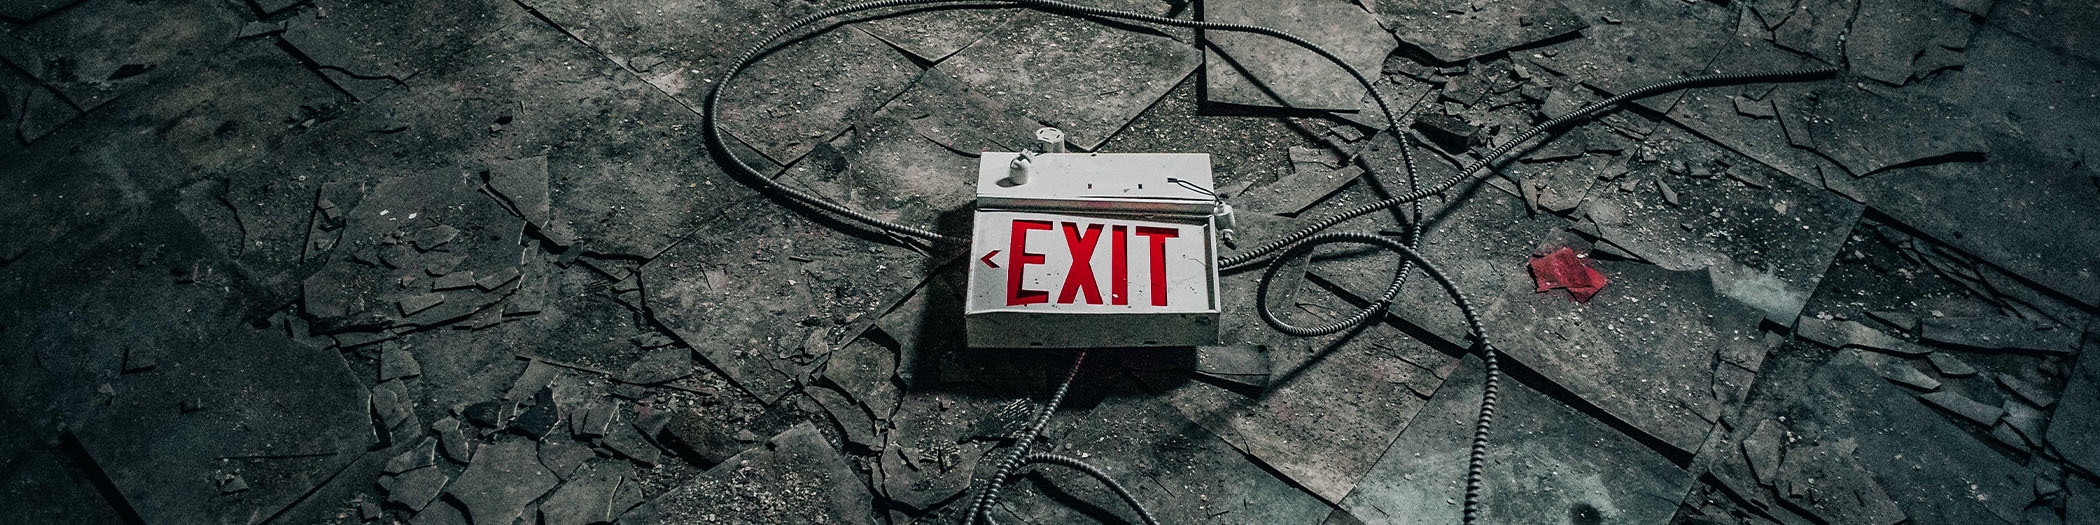 Exit sign on the floor